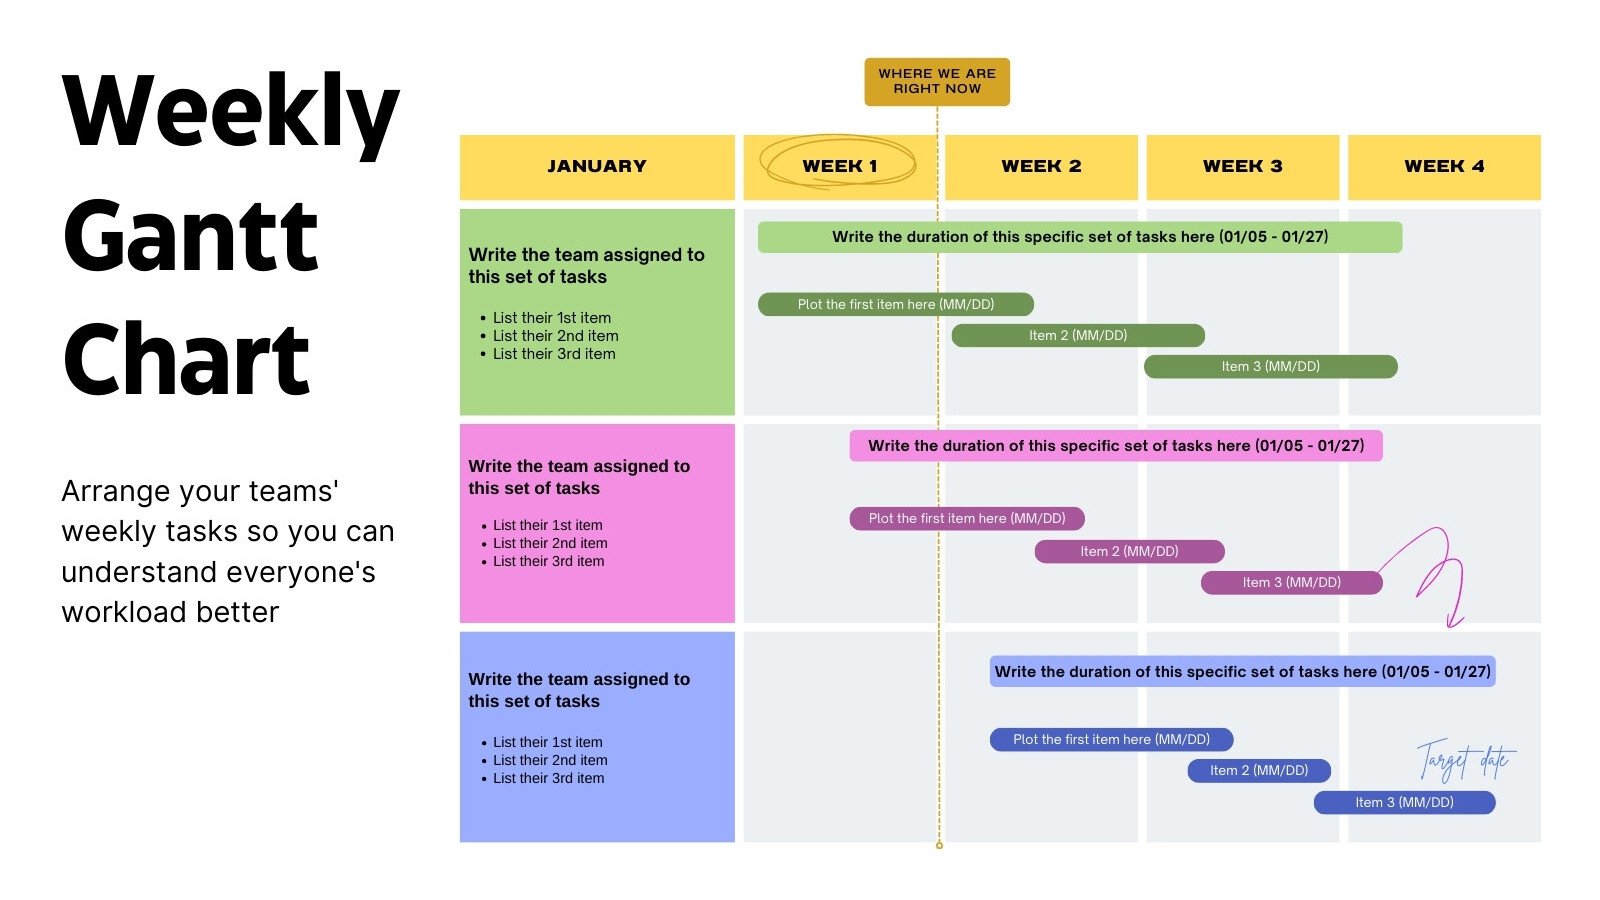 Weekly Gantt Chart Planning Whiteboard in Yellow Green Pink Spaced Color Blocks Style